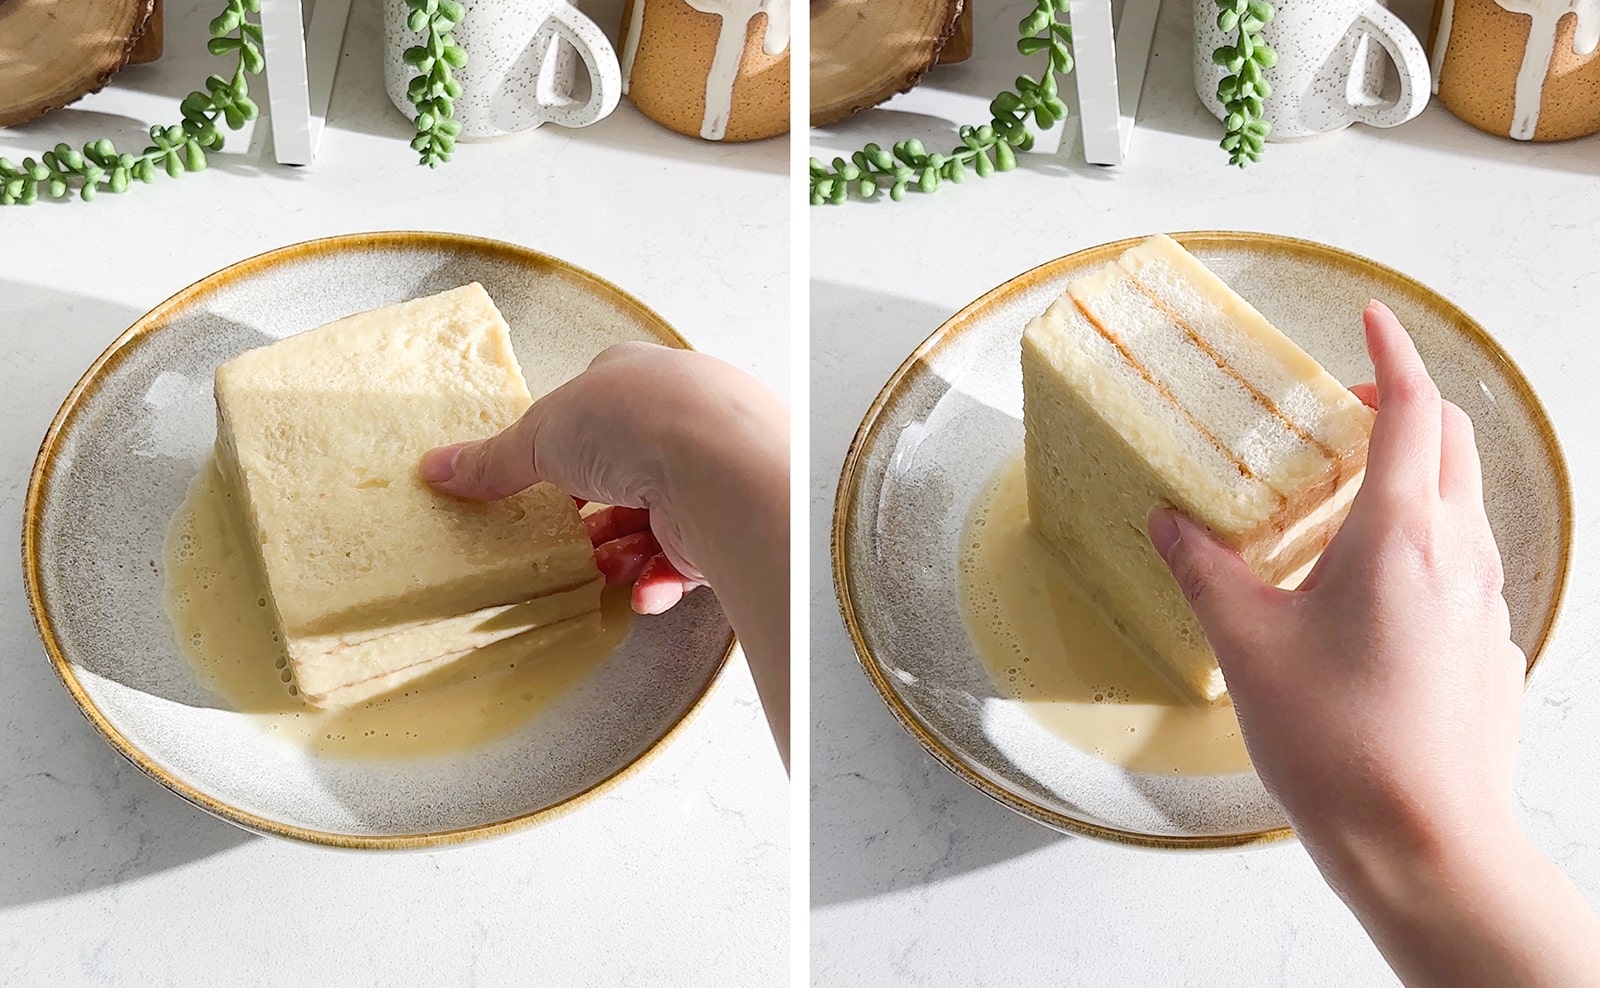 Left to right: dipping sandwich in egg mixture in a bowl, hand holding sandwich up on side in egg mixture.